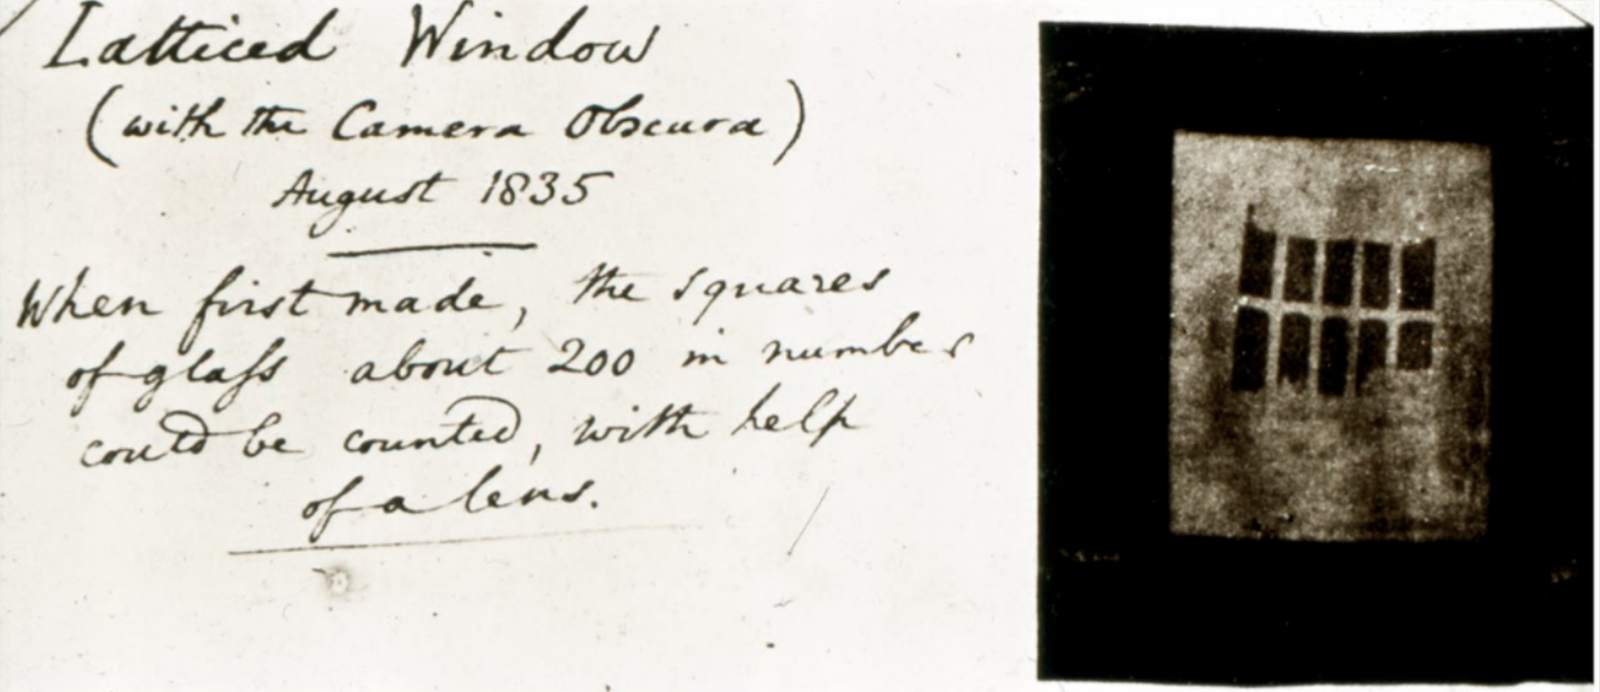 Hand written description on the left says, latticed window (with the camera obscura) August 1835, when first made the squares of glass about 200 in number could be counted, with help of a lens. On the right is a photographic negative, black rectangles of the panes in a grid on a white background, framed by black.